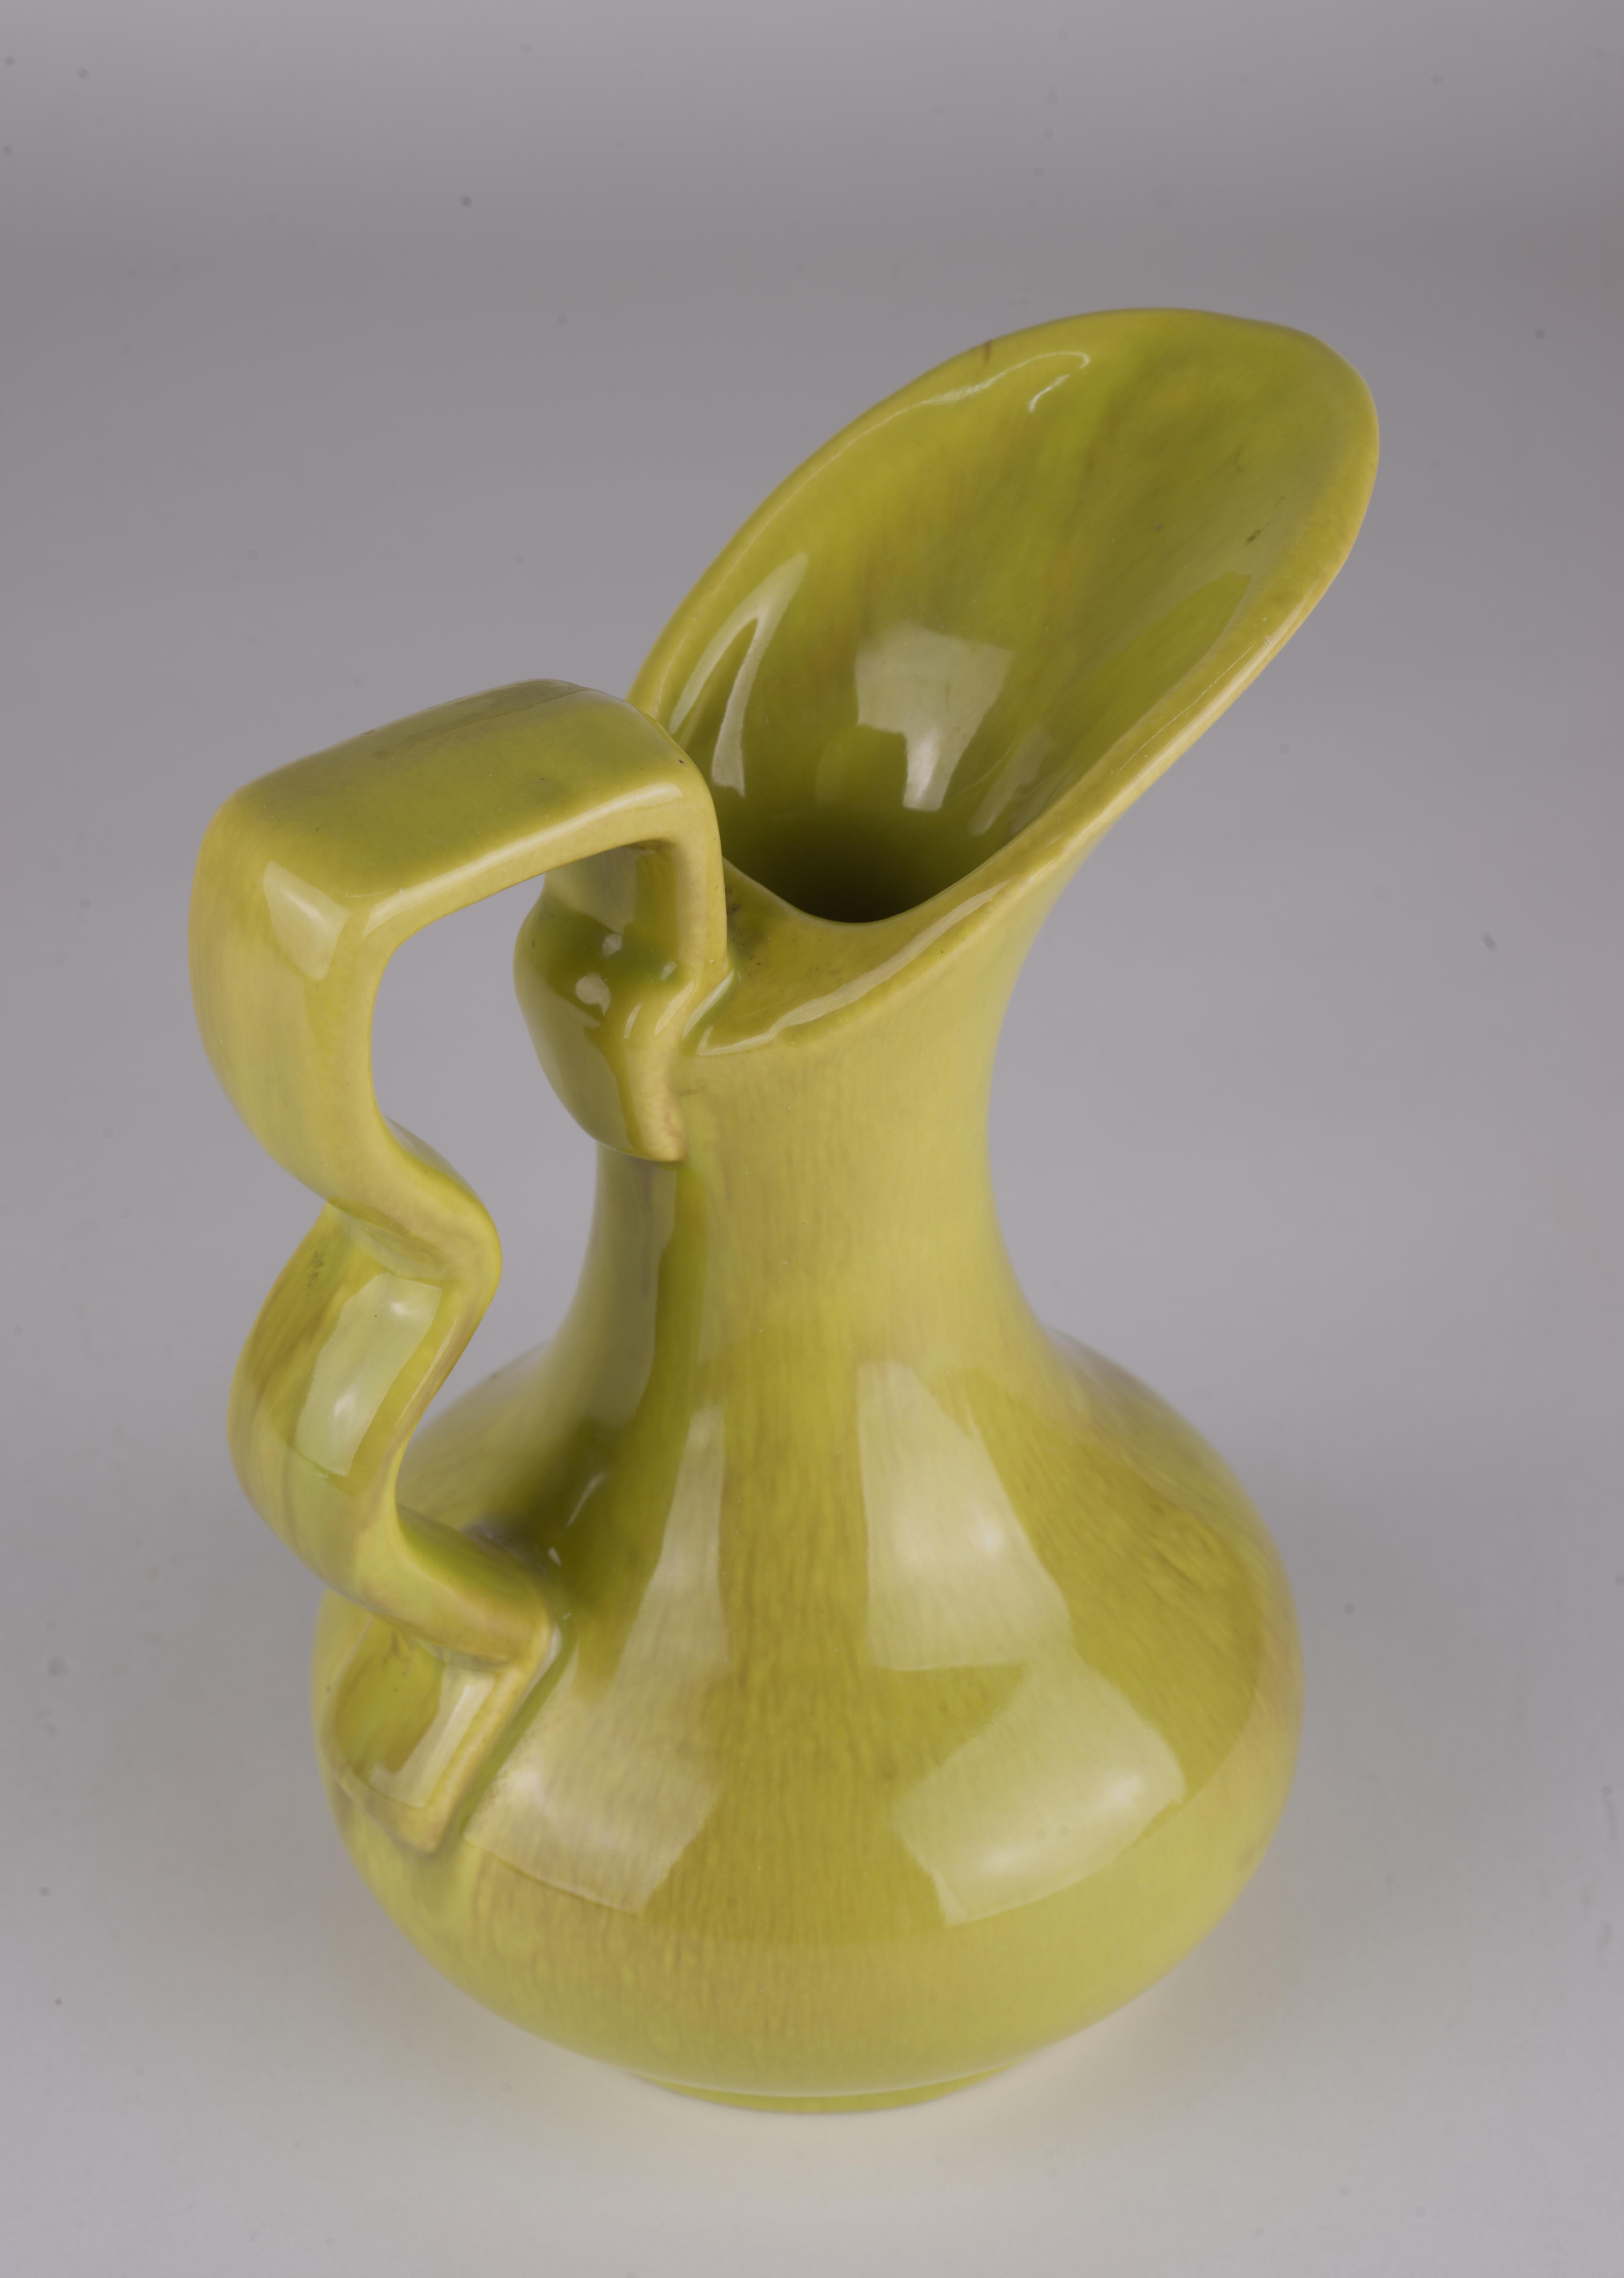 Gonder Pottery Bud Vase Ewer in Chartreuse Drip Glaze 1940s-1950s For Sale 3